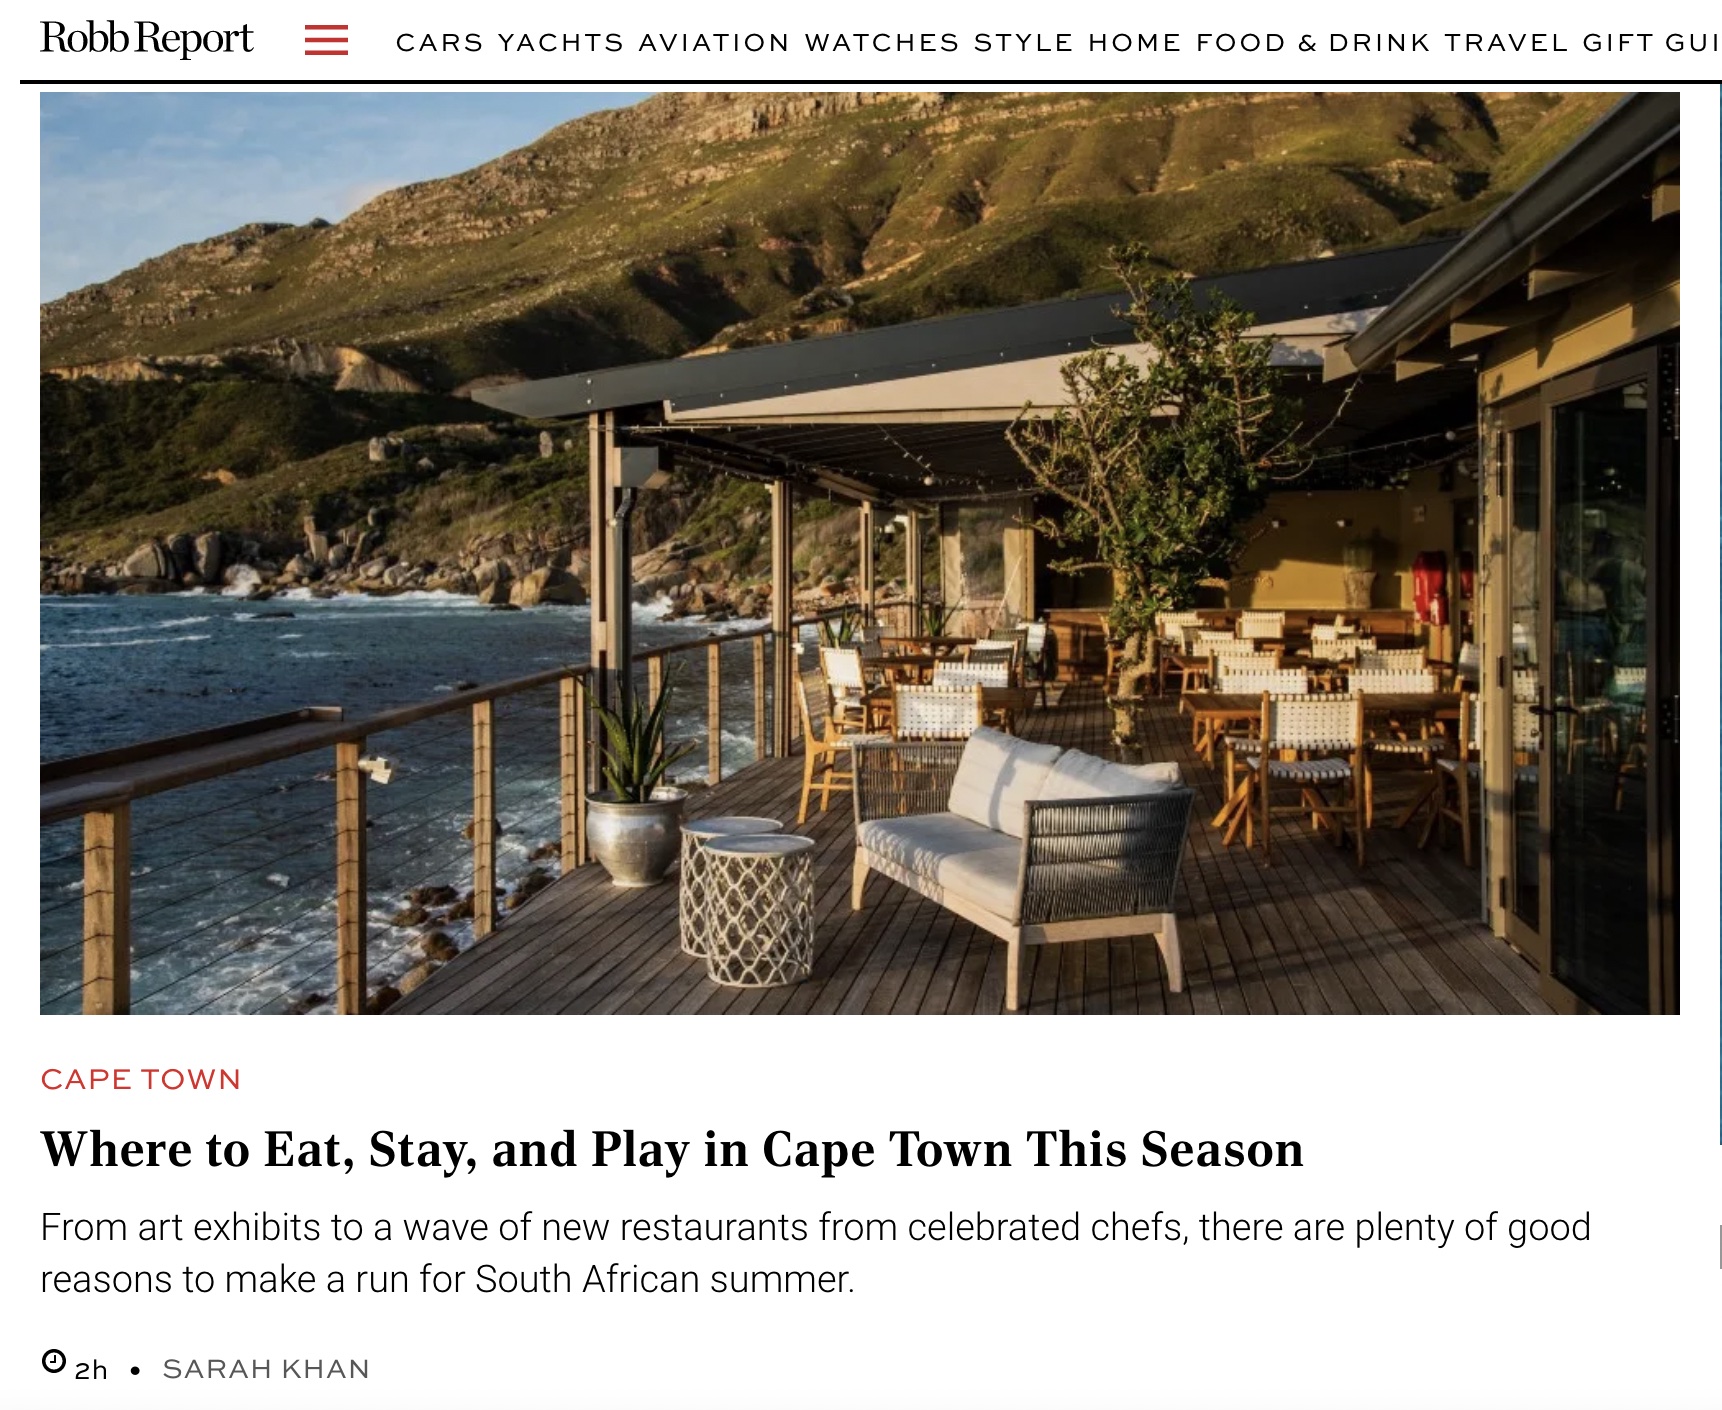 Robb Report: Where to Eat, Stay, and Play in Cape Town This Season